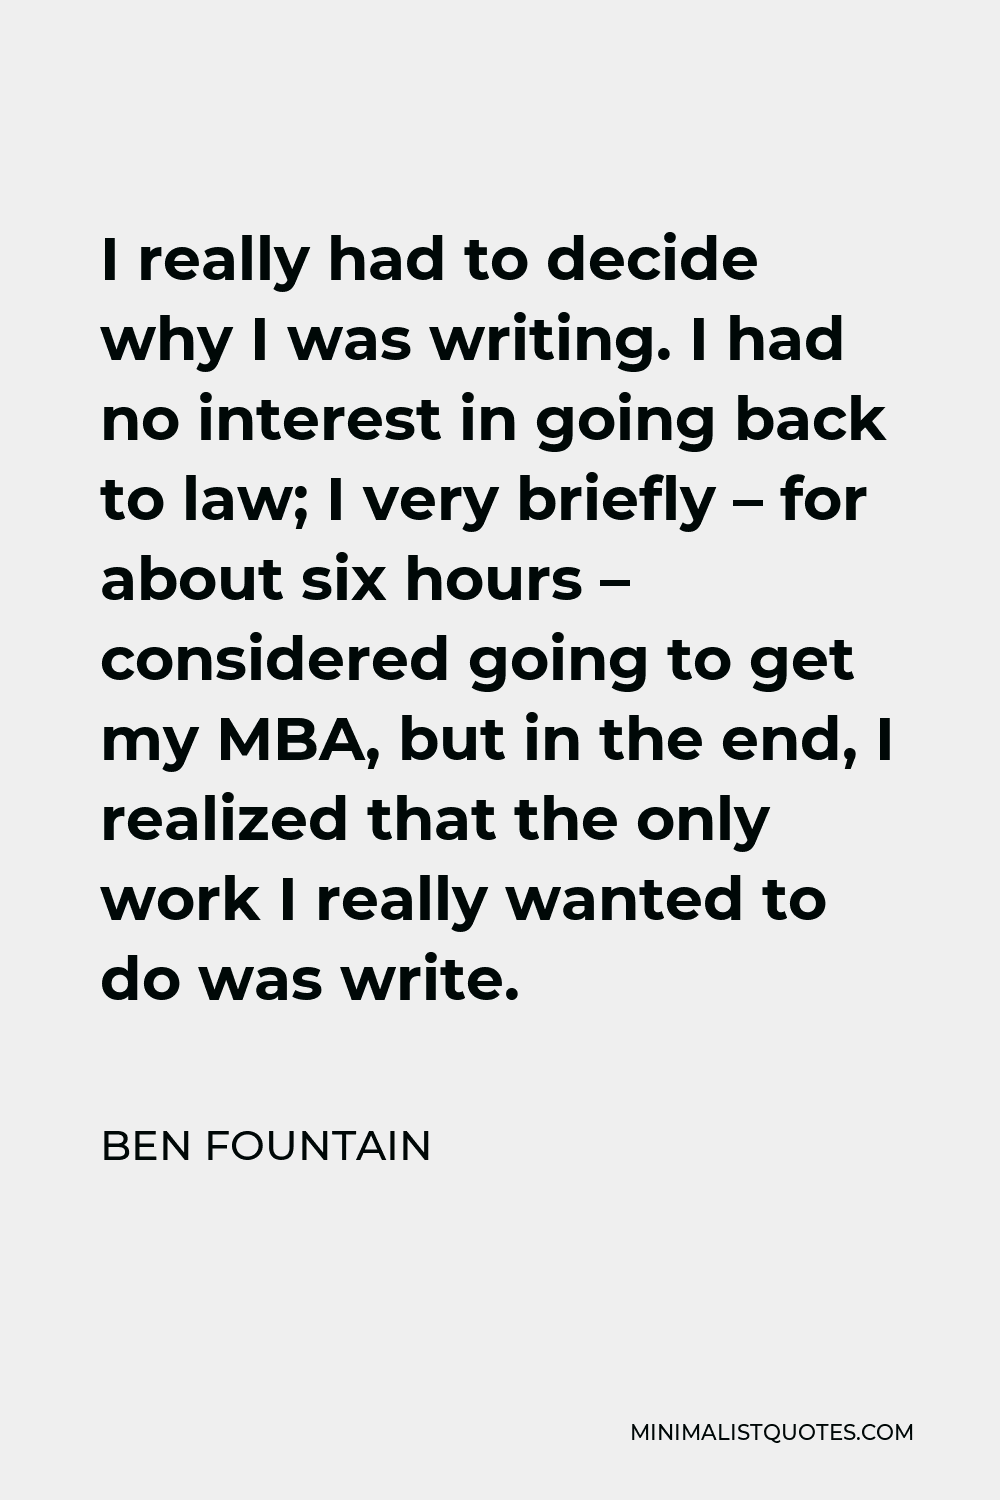 Ben Fountain Quote - I really had to decide why I was writing. I had no interest in going back to law; I very briefly – for about six hours – considered going to get my MBA, but in the end, I realized that the only work I really wanted to do was write.